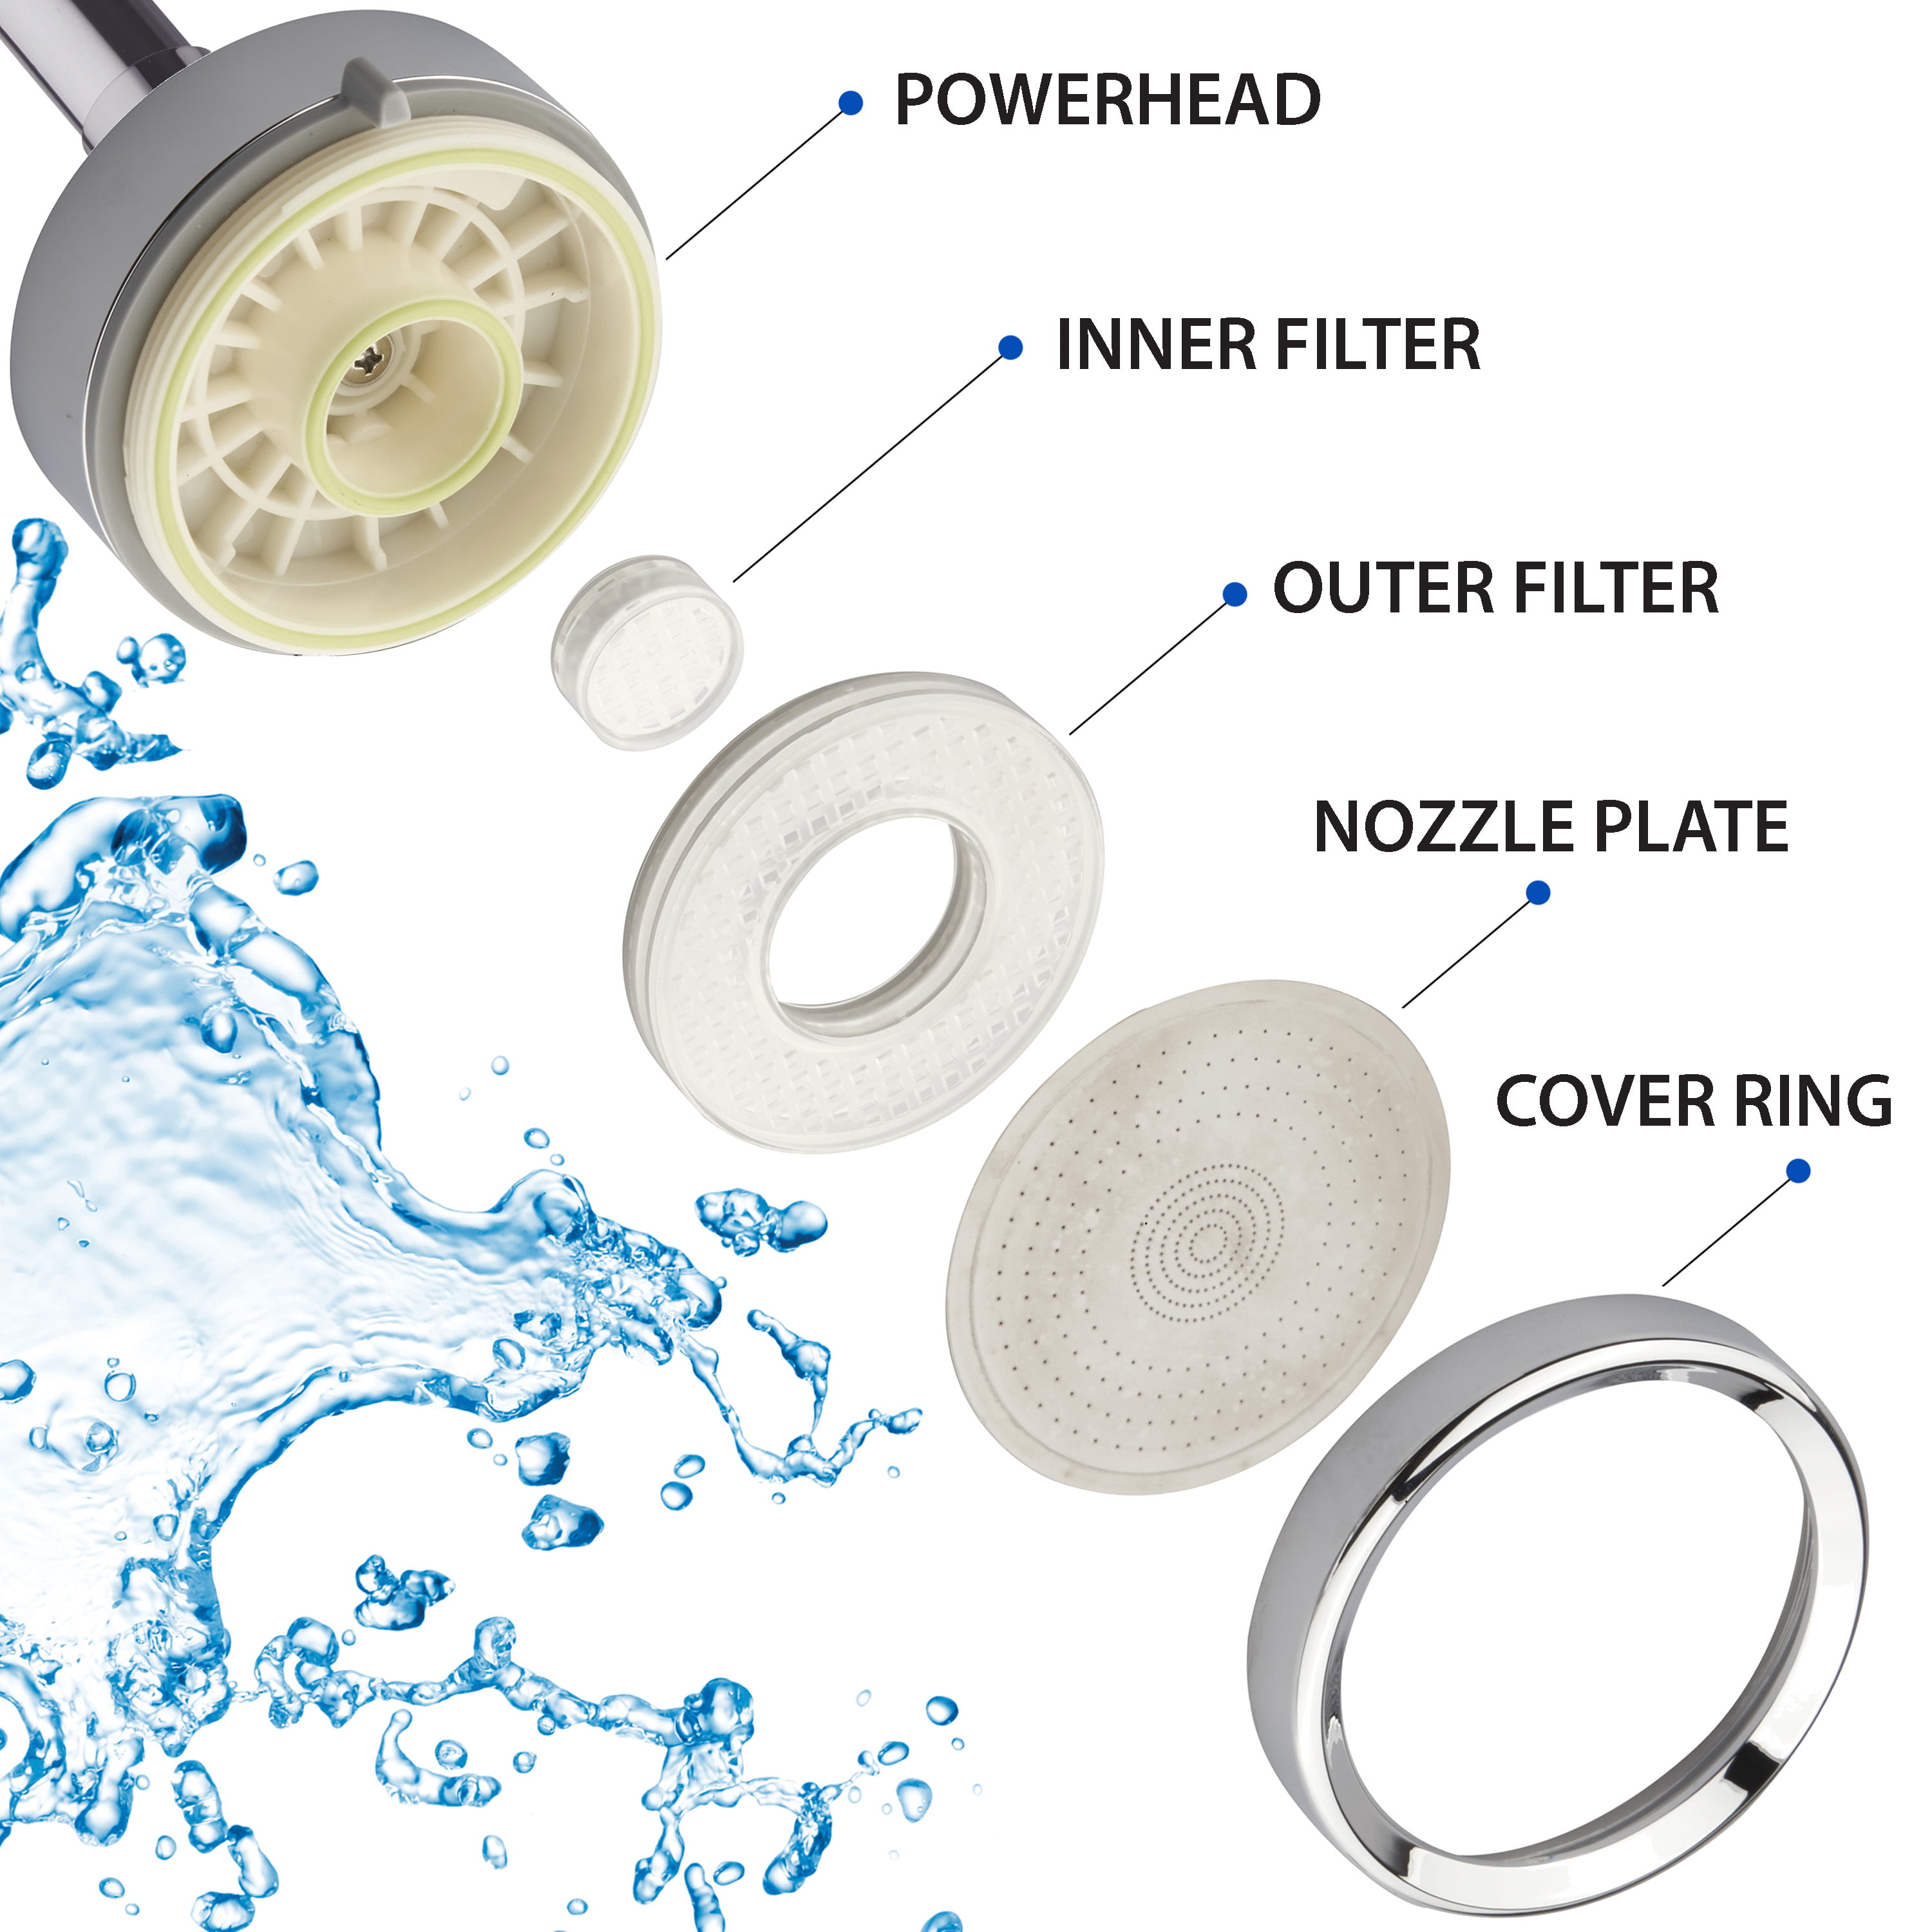 LaserJet Hand Shower Head Chrome Finish 2 Water Filters & Pause Switch 